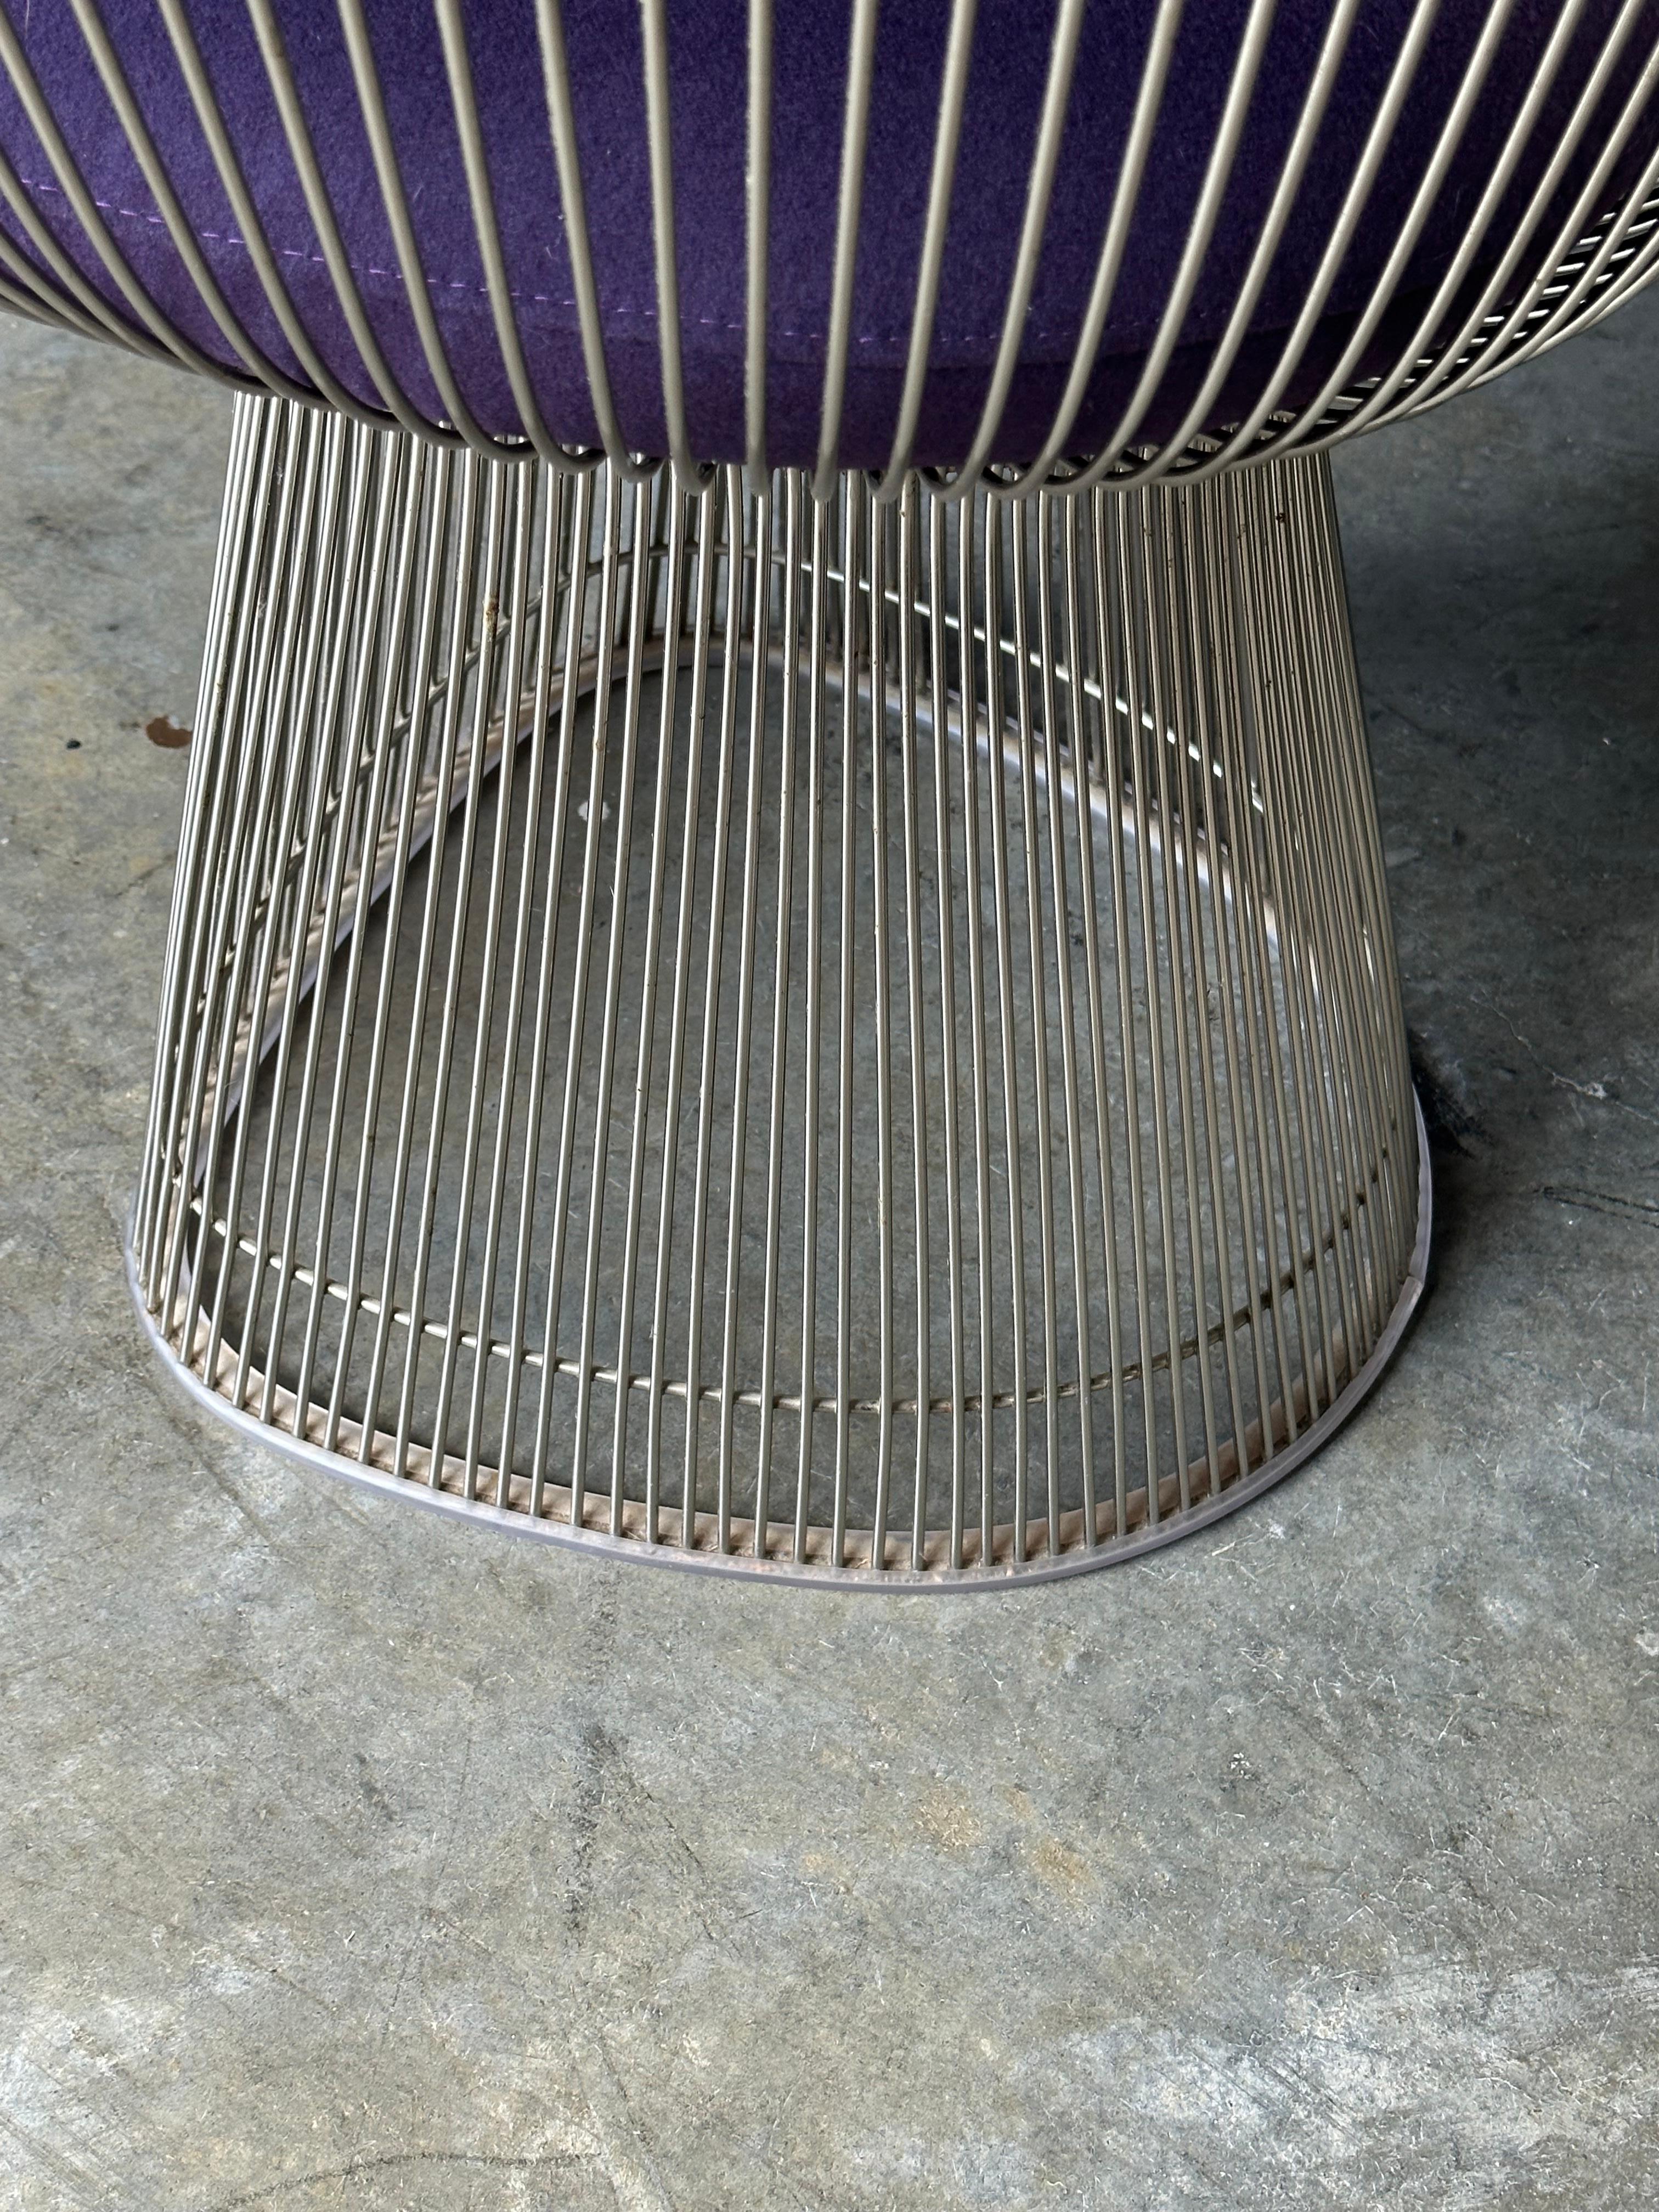 Warren Platner Arm Chairs for Knoll- Set of 6 For Sale 8